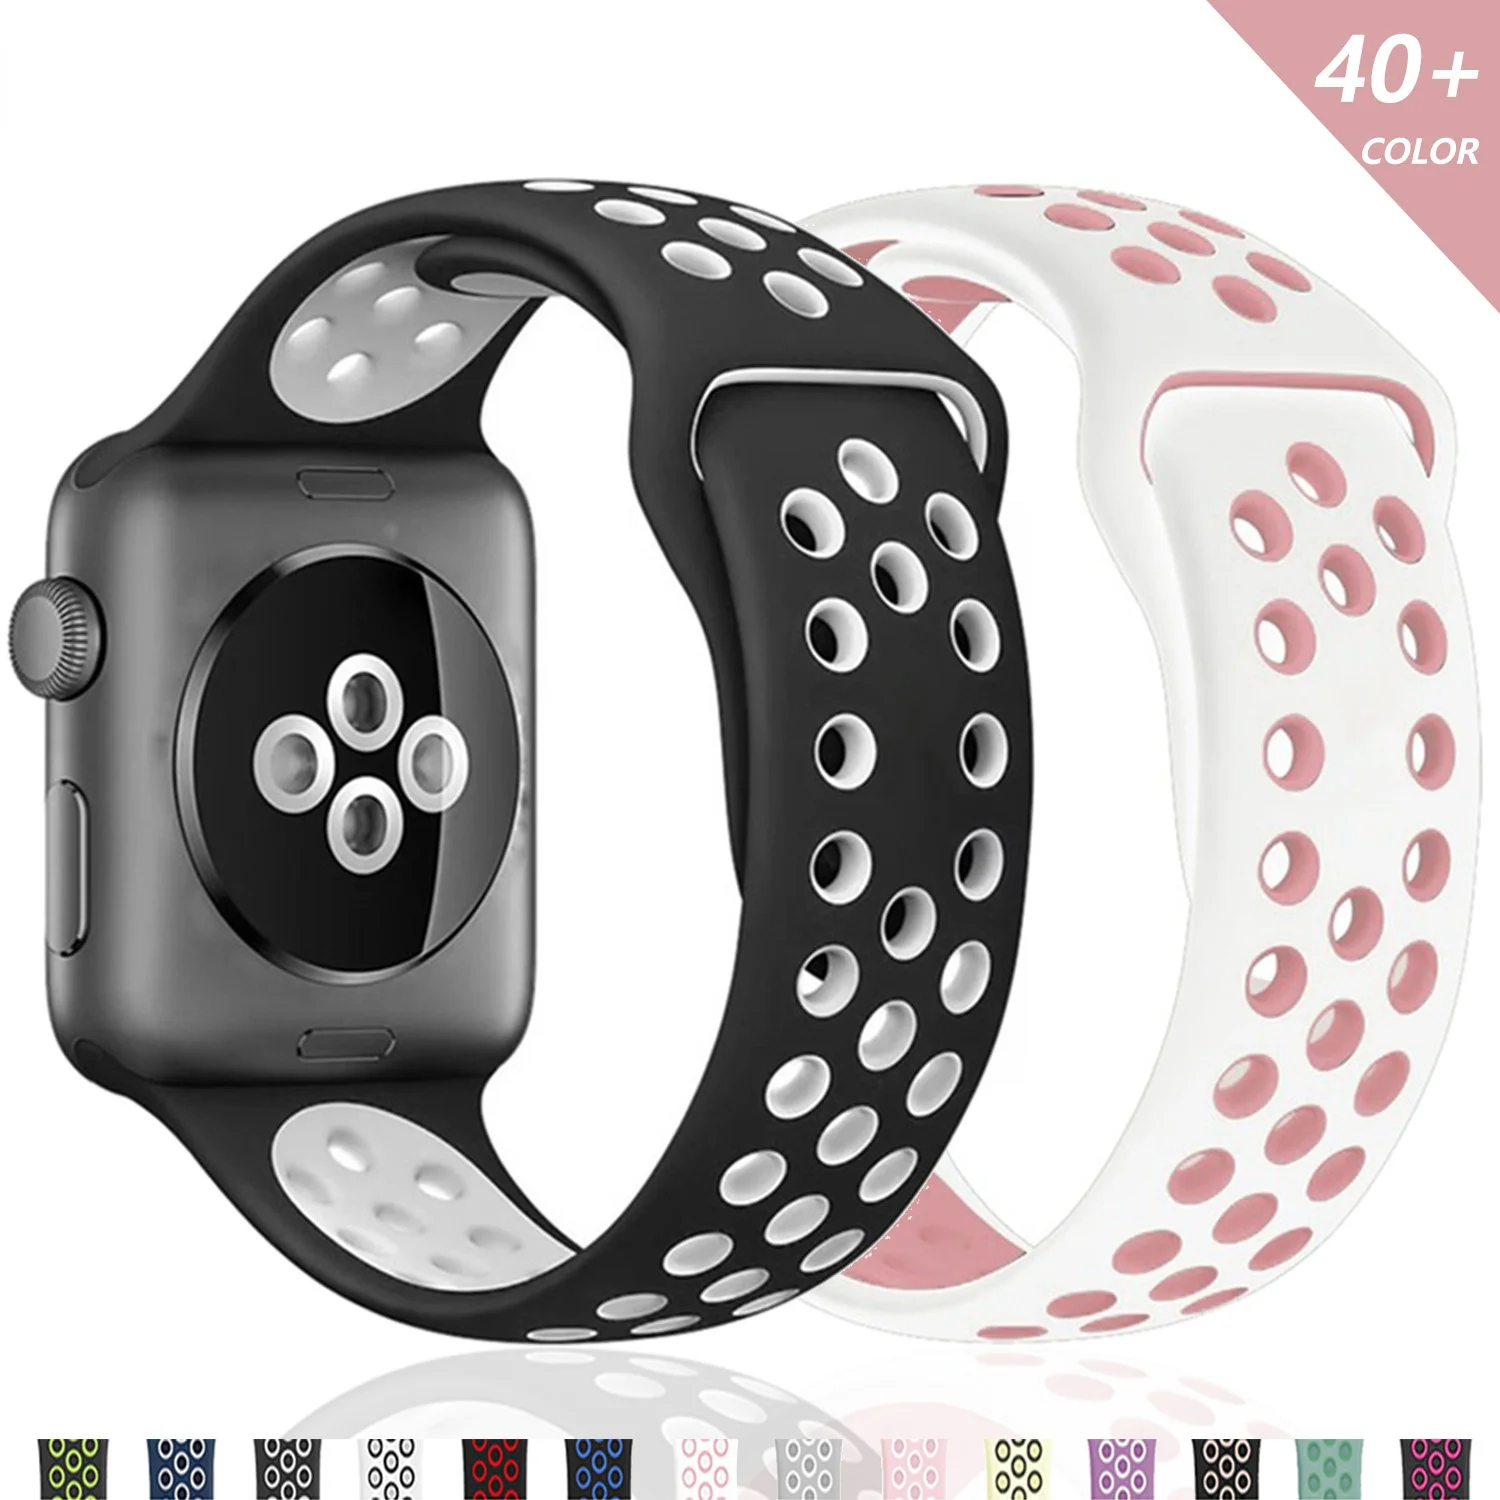 Silicone Strap For Apple Watch band 40mm 44mm 38mm 42mm 44 mm Rubber watchband smartwatch bracelet iWatch series 3 4 5 6 se band silicone strap for apple watch band 44mm 40mm 38mm 42mm rubber belt smartwatch watchband bracelet iwatch se 6 3 4 5 7 series 41